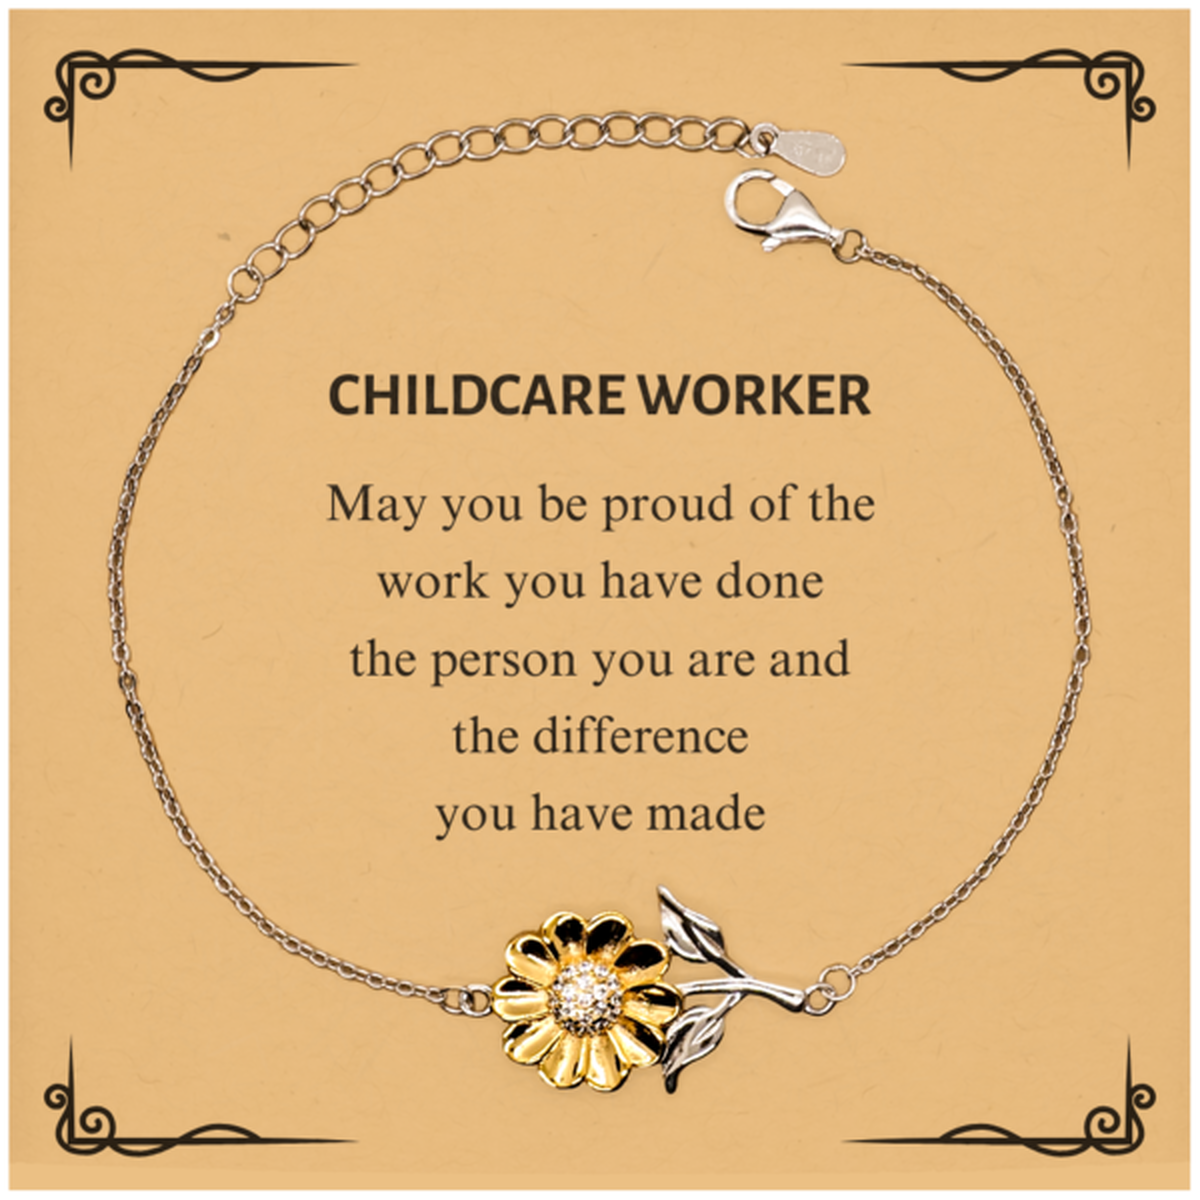 Childcare Worker May you be proud of the work you have done, Retirement Childcare Worker Sunflower Bracelet for Colleague Appreciation Gifts Amazing for Childcare Worker